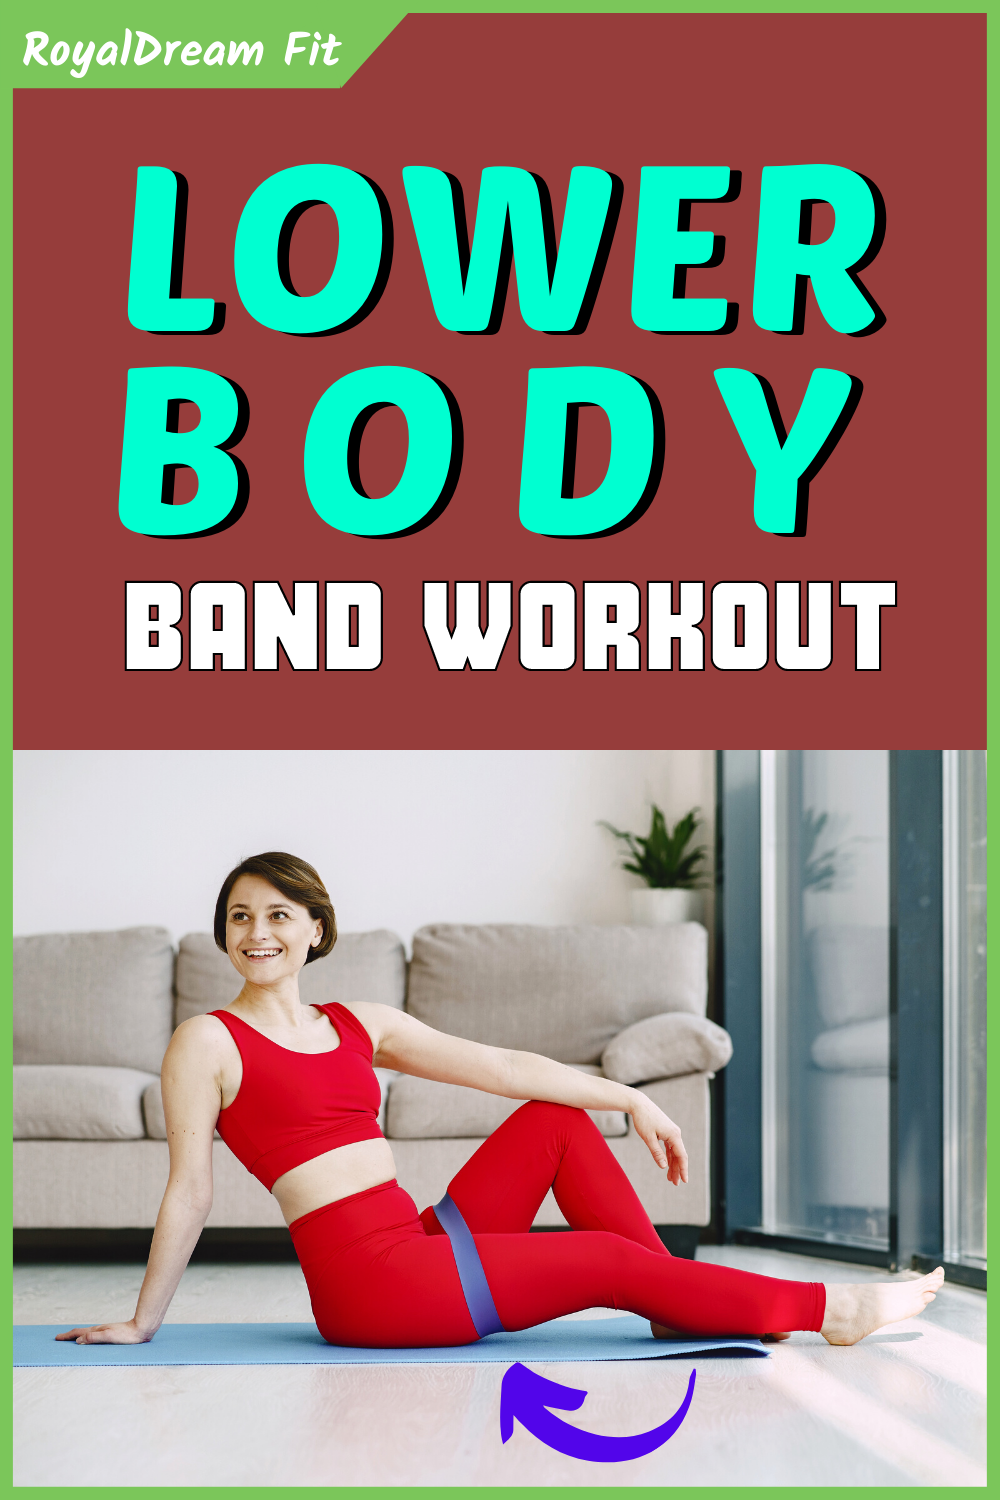 Try this workout for the lower body using a band from the comfort of your home!